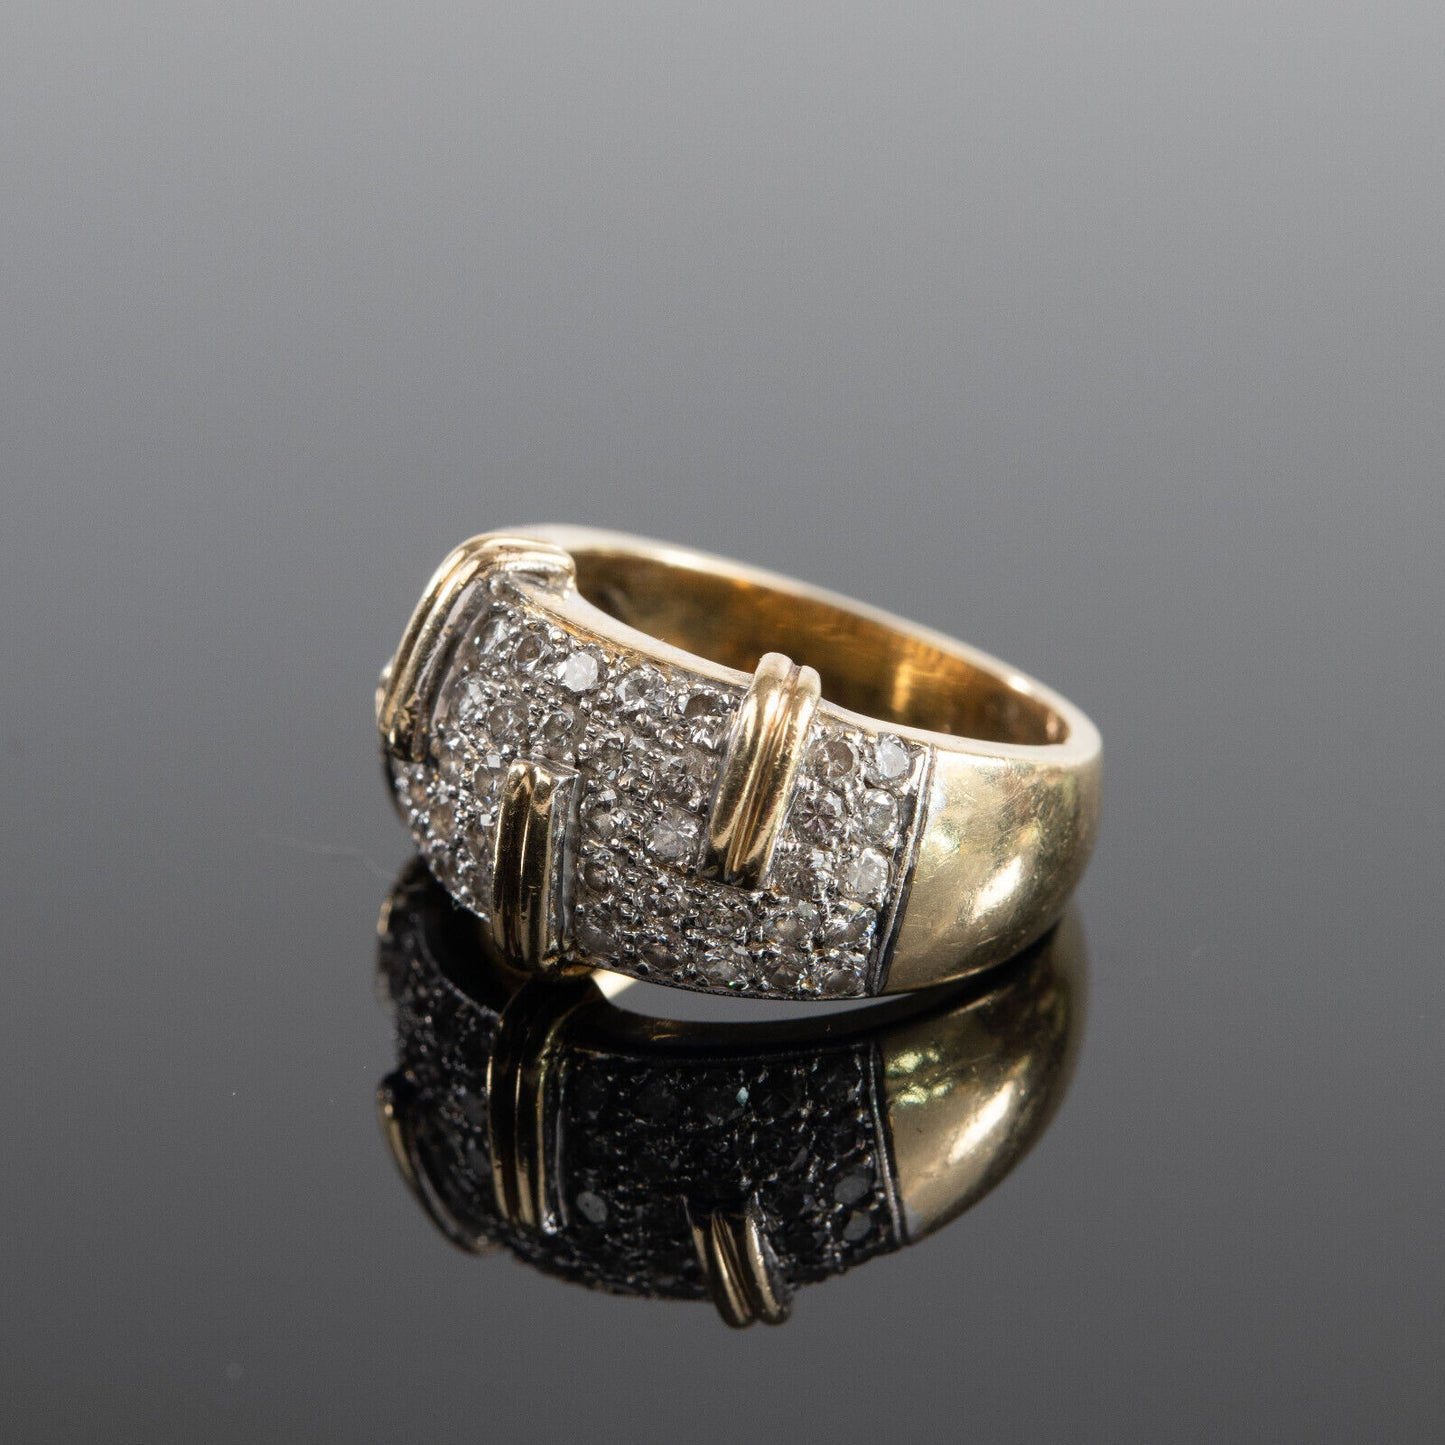 14K Gold 58 Count Diamond Ring (Appraisal Included)